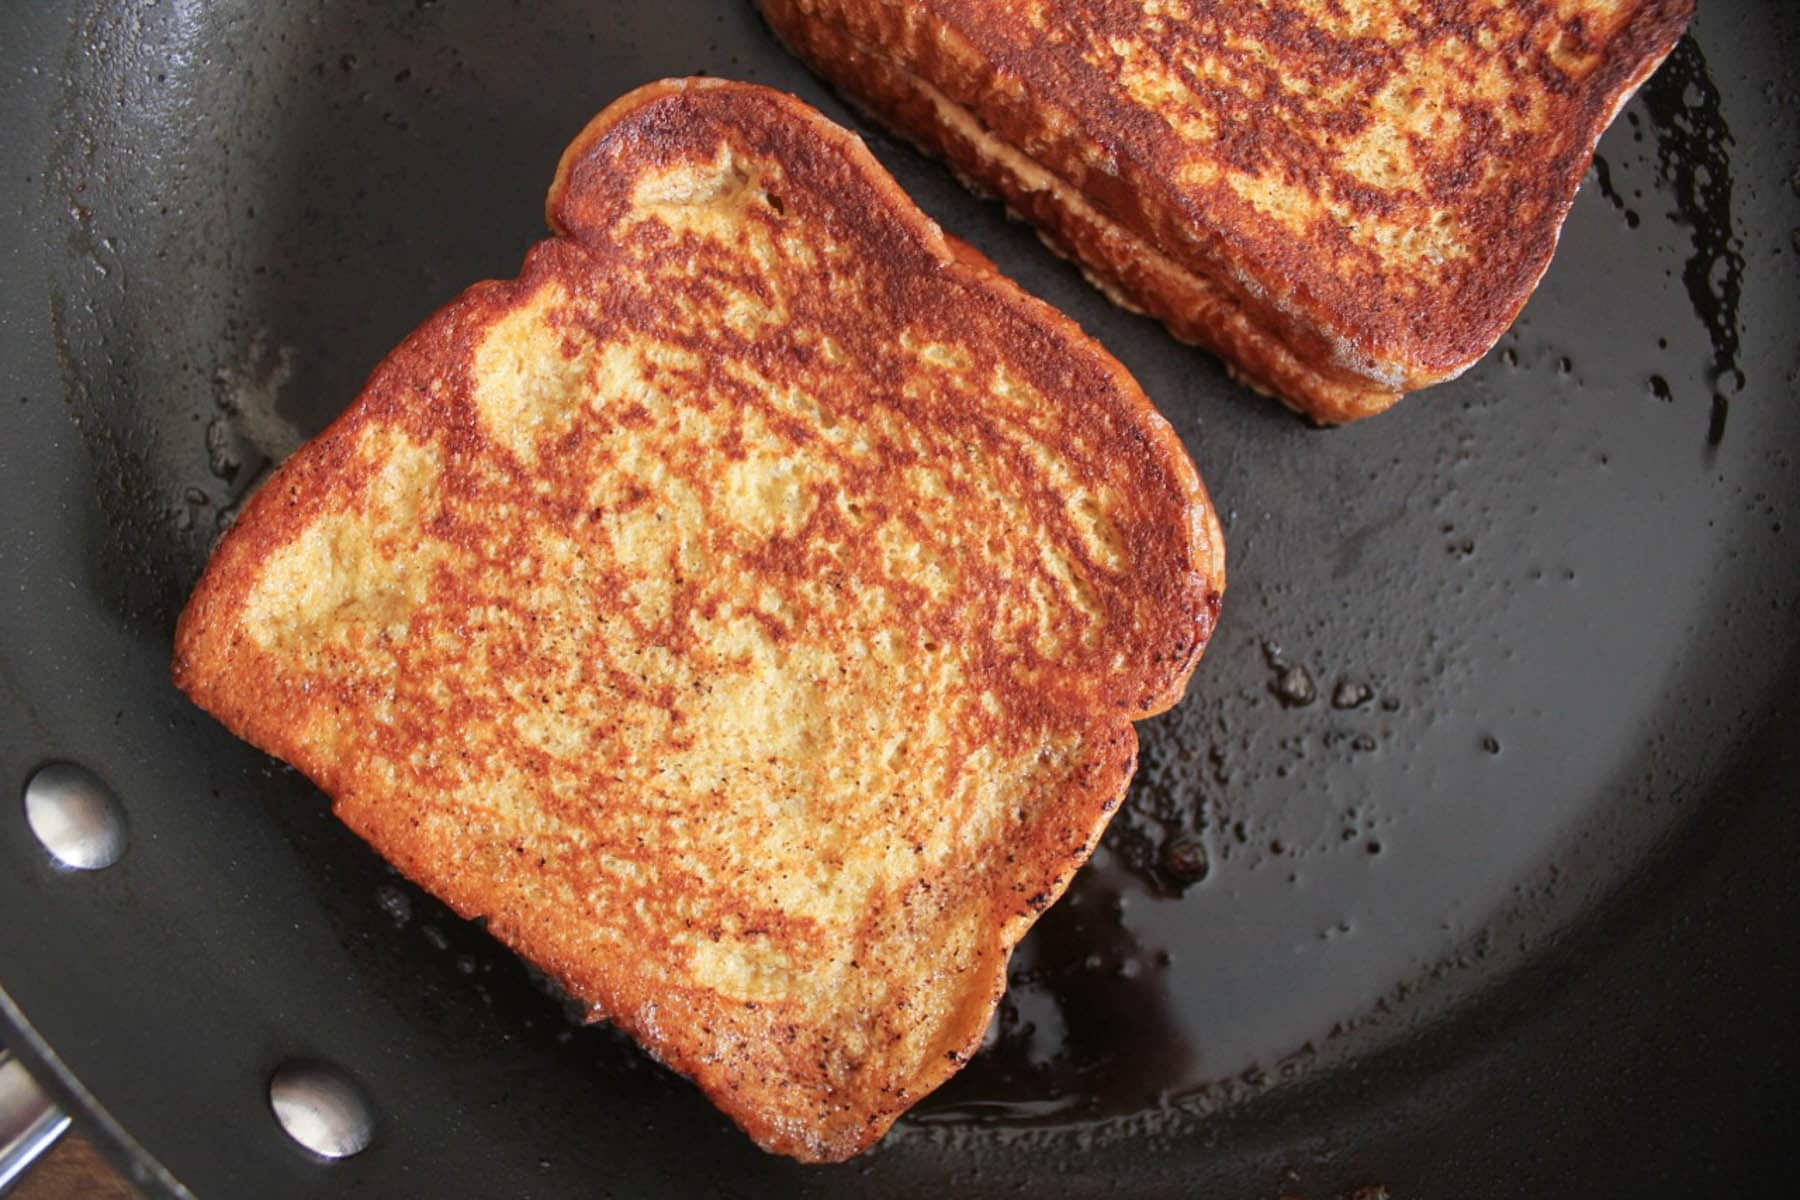 peanut-butter-and-bacon-stuffed-french-toast-with-caramelized-bananas-step-9